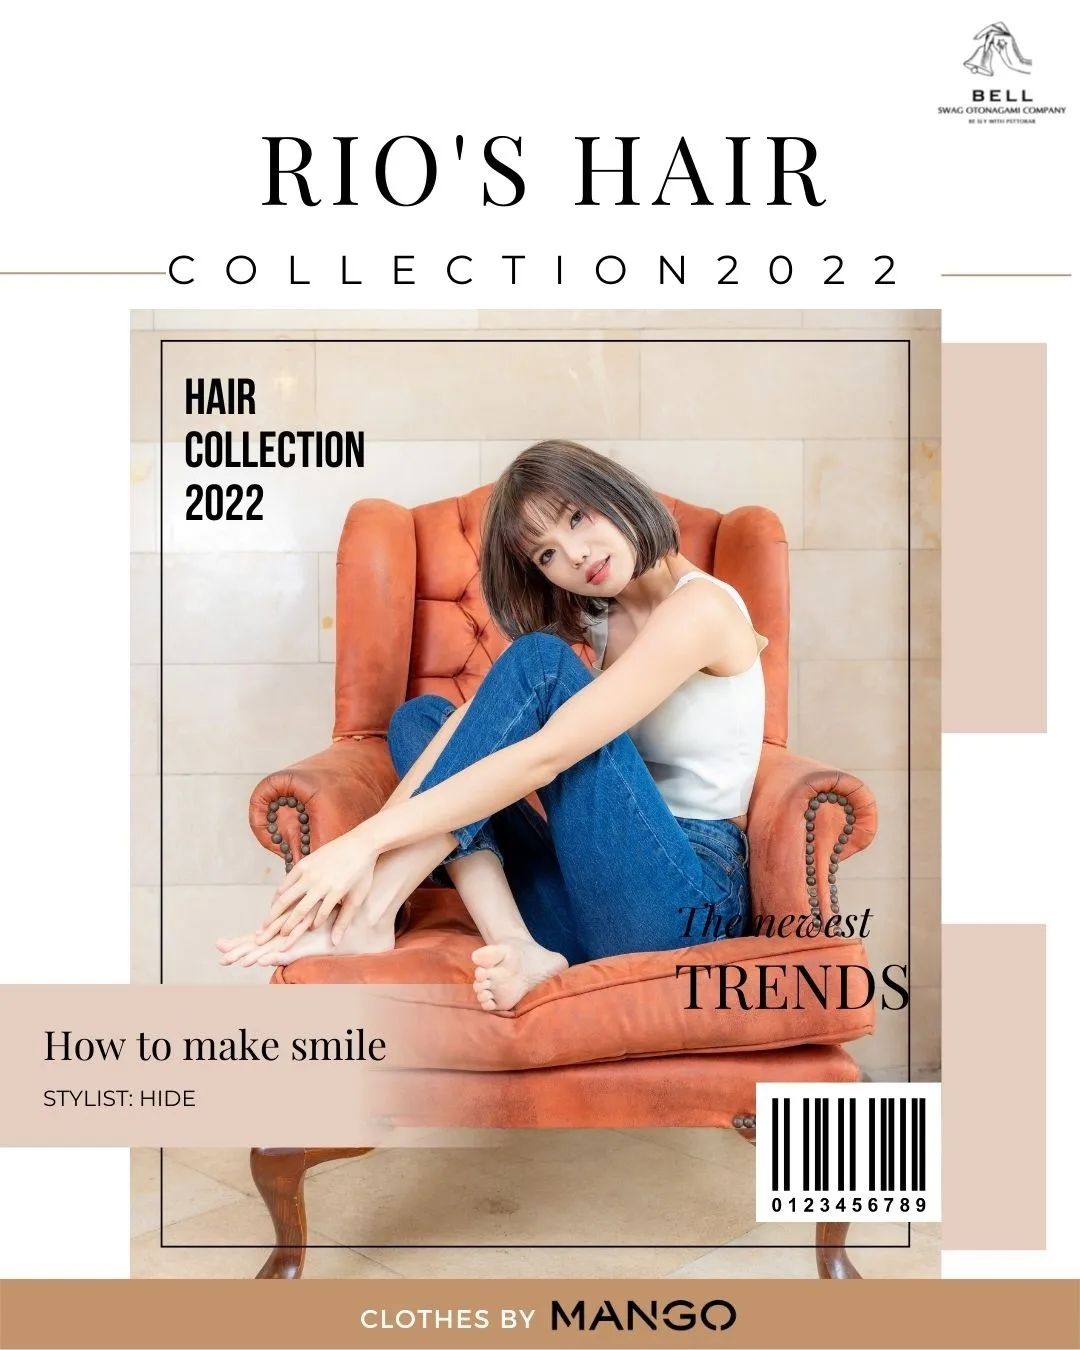 Rio’s Hair collection ️  Hair by :  @bellotonagami  Clothes by : @mango  FB.  BELL Otonagami  salon  Tel.020003001
LINE.@skk6845h
Business hours:9AM〜9PM  Please feel free to contact us/お気軽にお問合せください️  #Bellotonagamisalon #ร้านทำผมญี่ปุ่น #バンコク美容室 #バンコク駐在 #バンコク在住